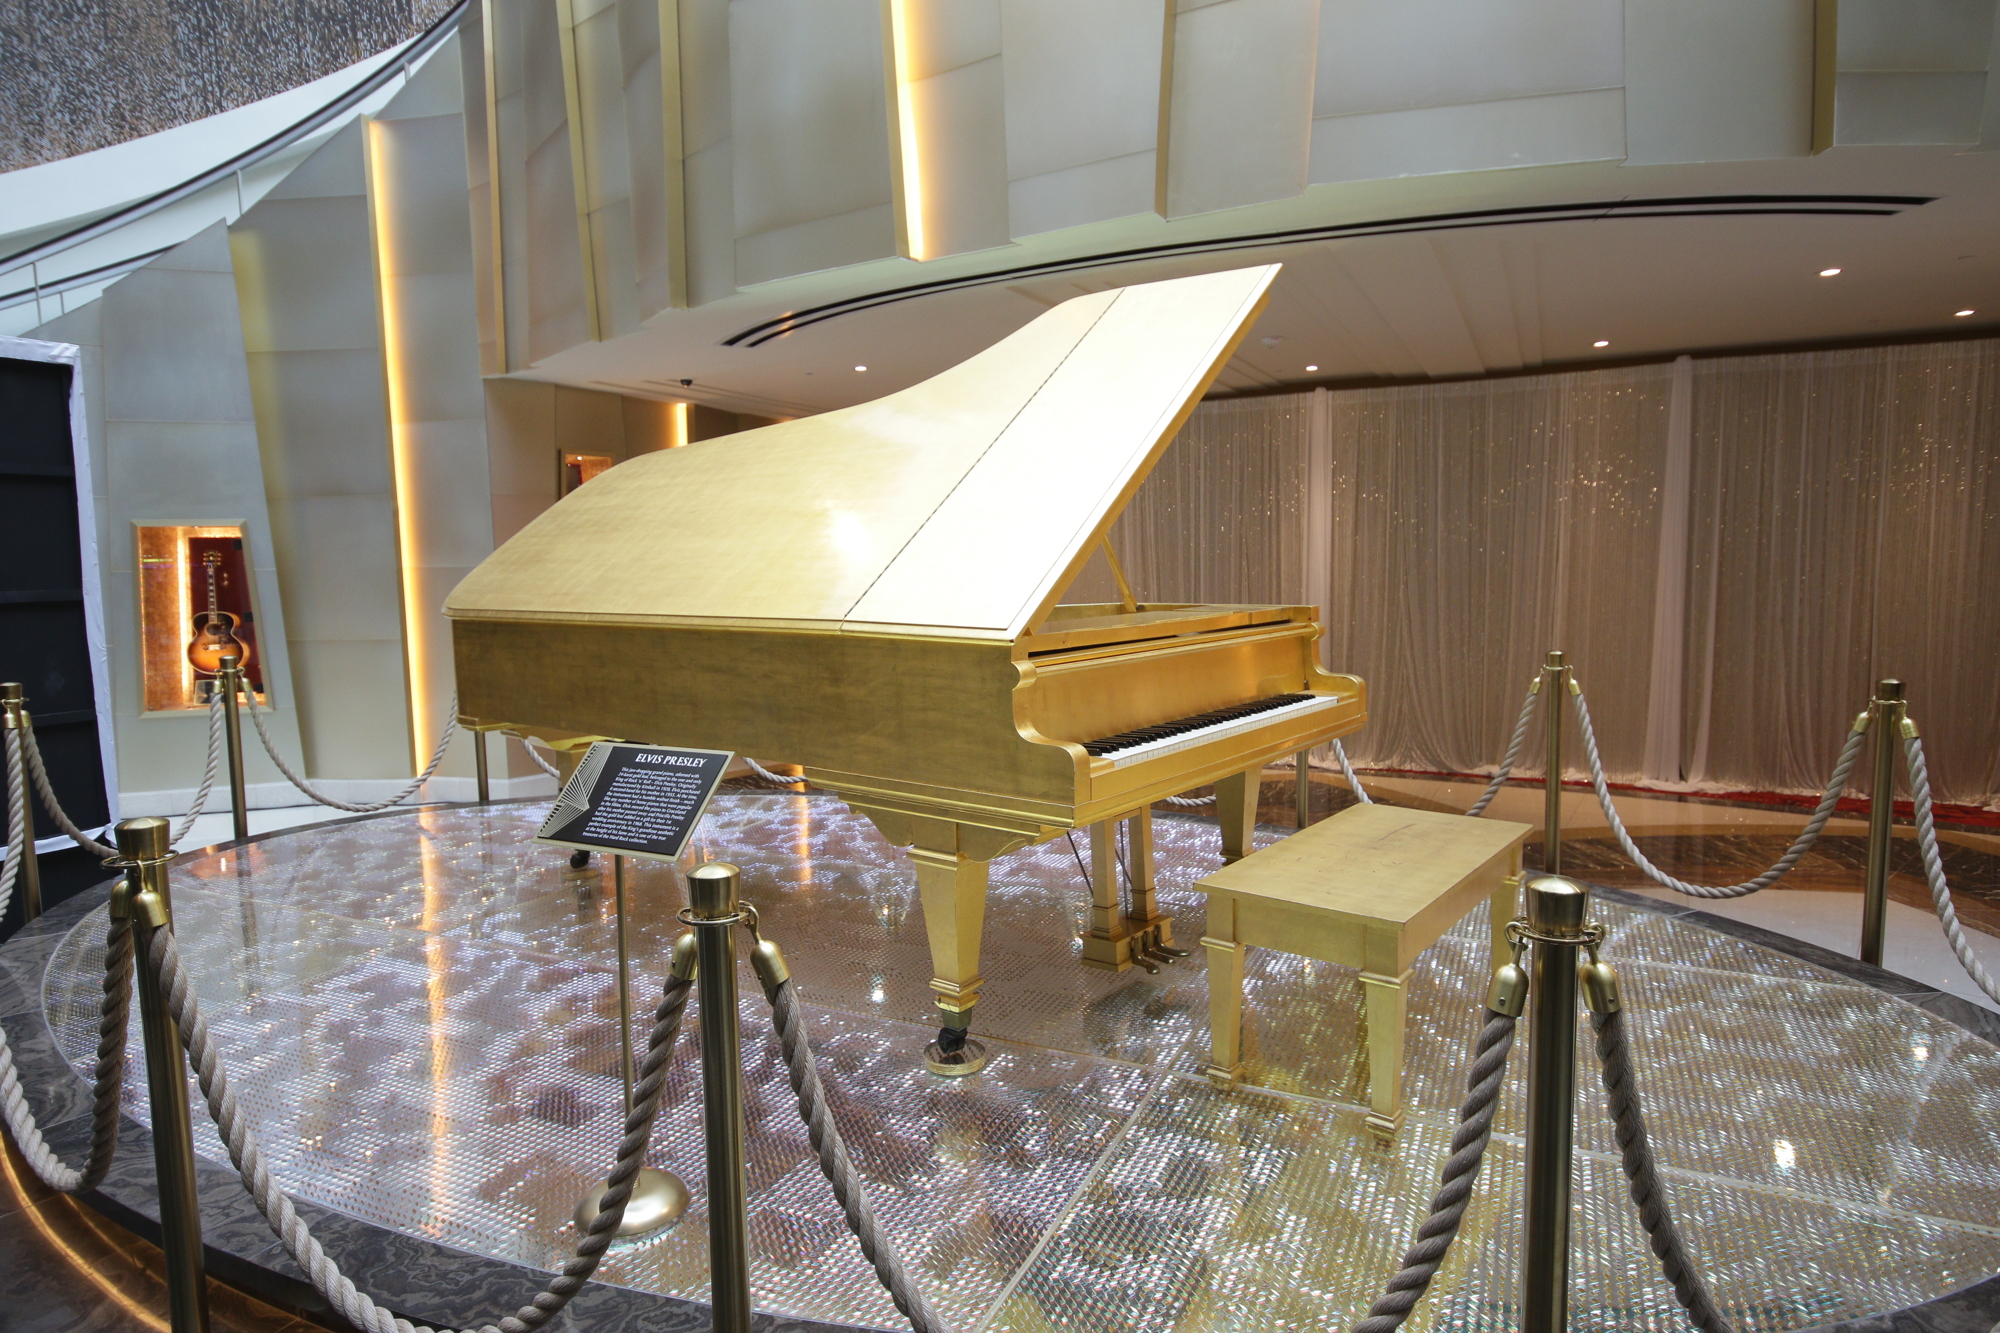 Elvis Presley's grand piano covered in 24-karat gold now greets visitors upon arrival to the Seminole Hard Rock Resort & Casino in Tampa. Courtesy photo.